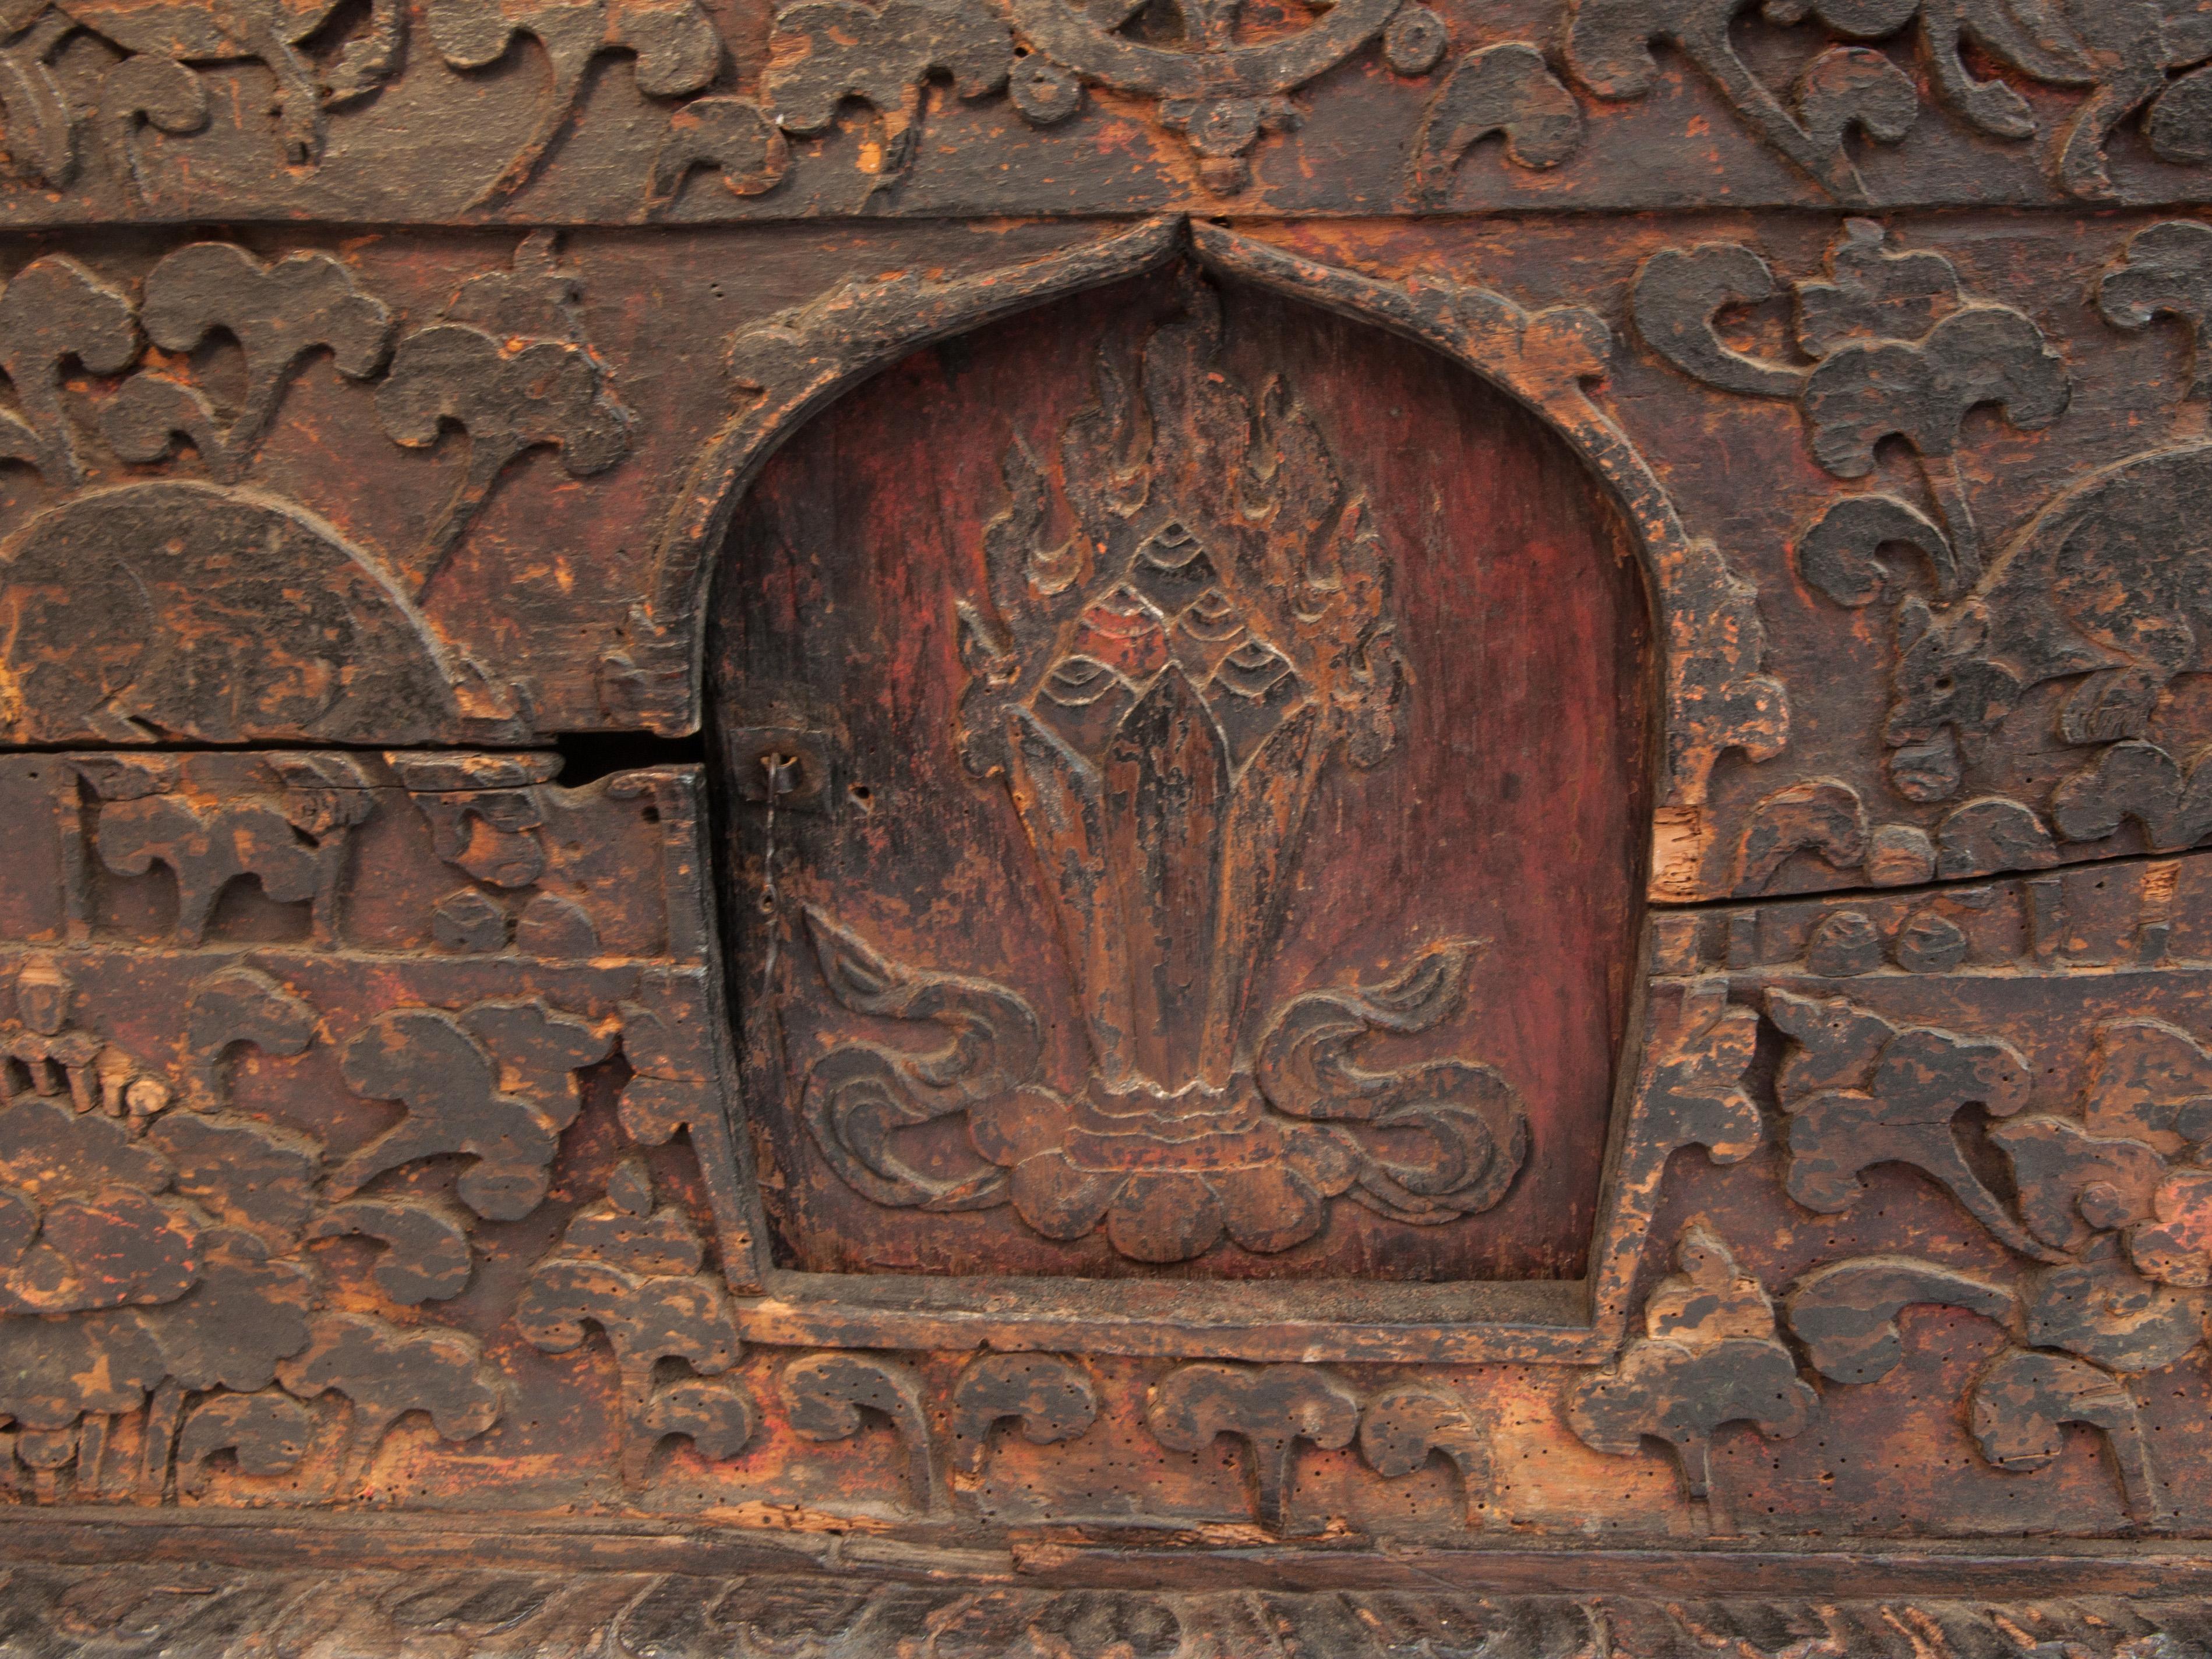 Antique Tibetan style religious storage box / table from Bhutan, 19th century or earlier.
This type of box would have been most commonly found in a village monastery, where it would have been used to store especially important thangkas (Tibetan